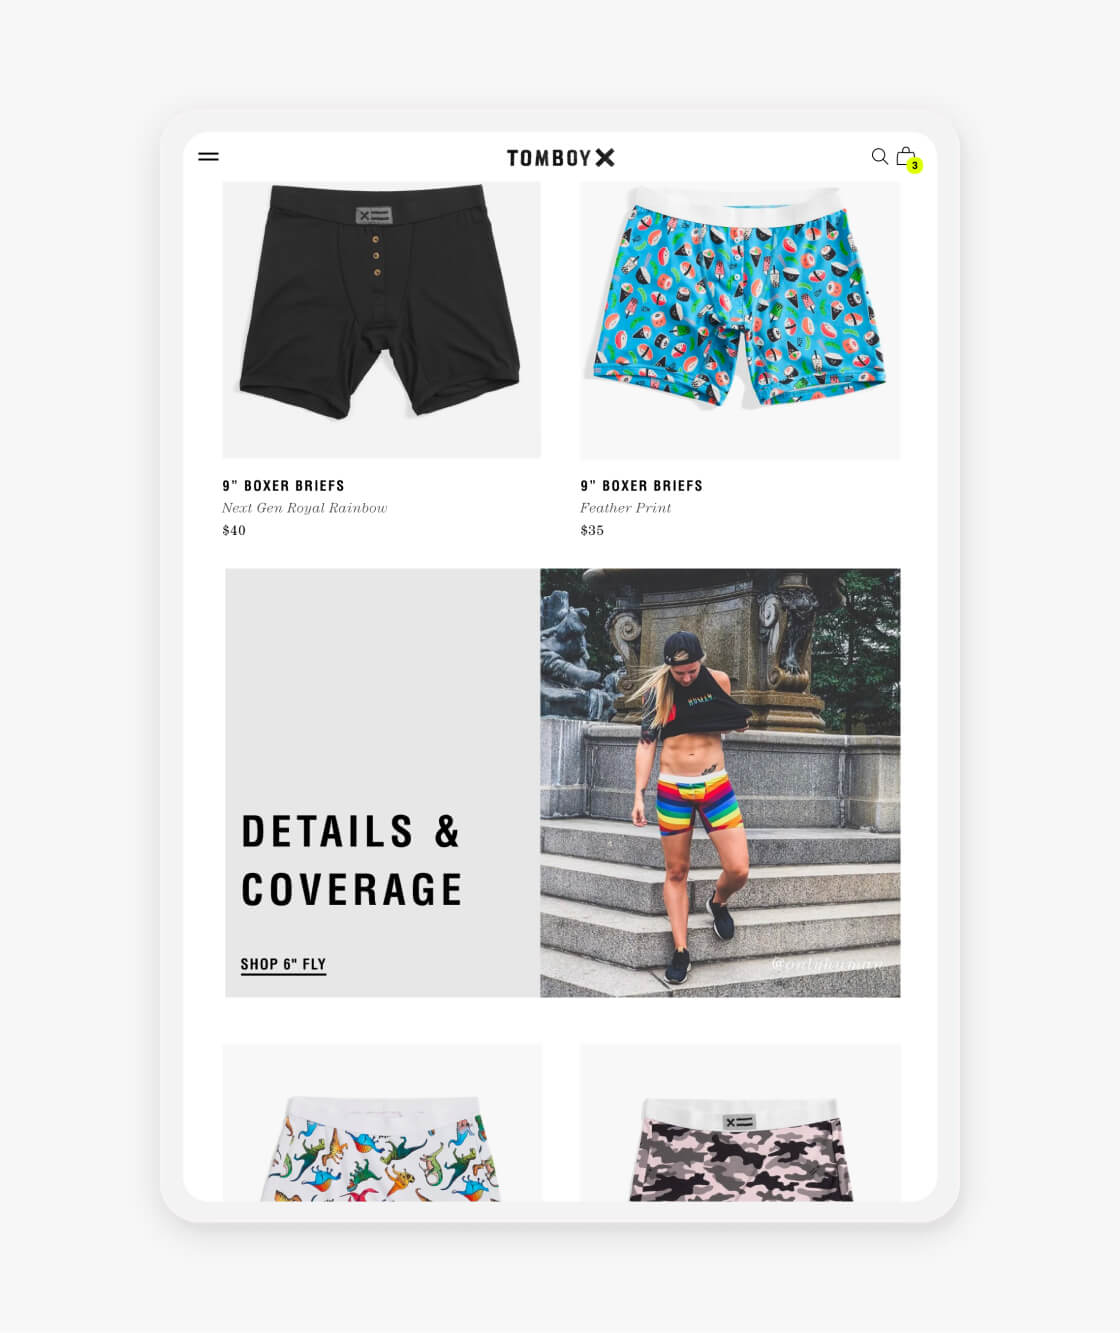 tomboy x website product collection on a tablet